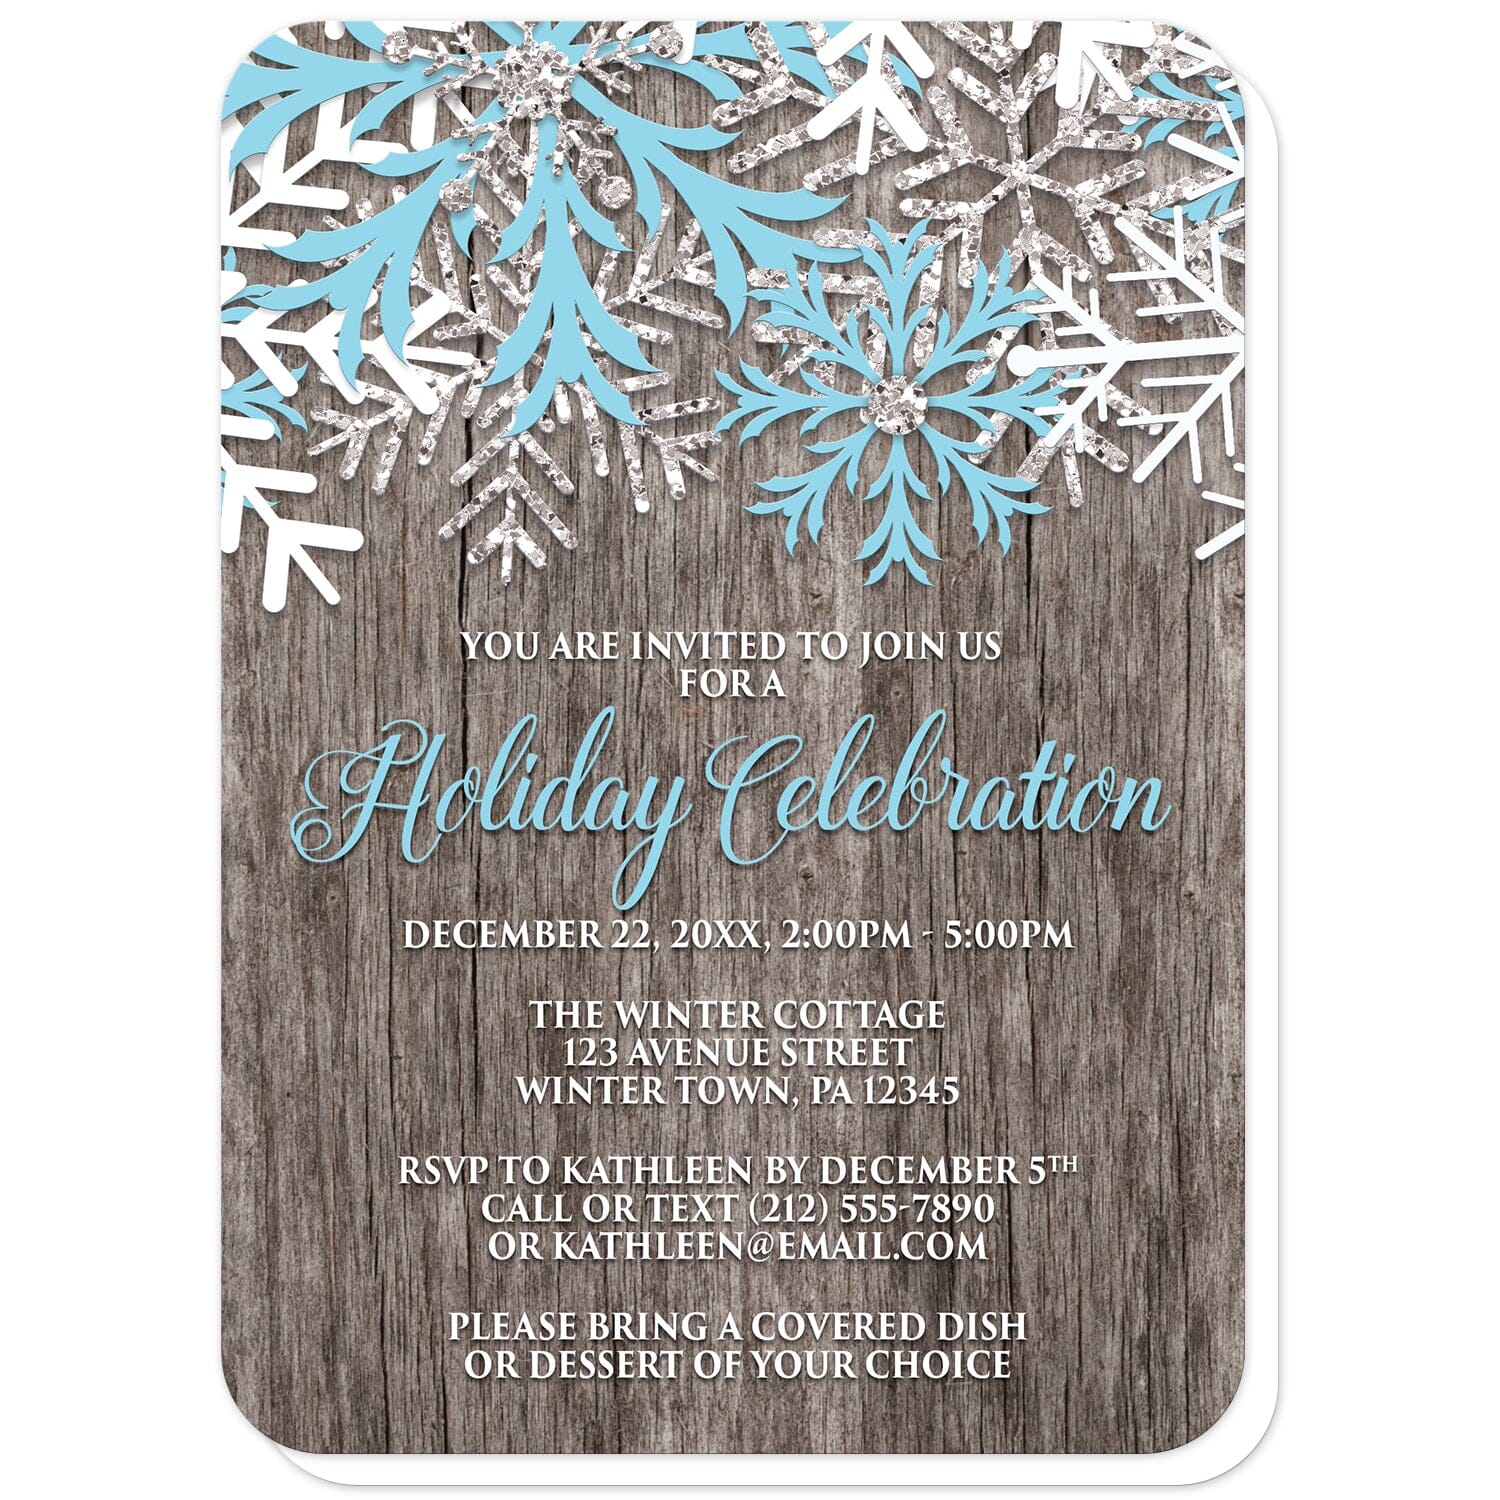 Rustic Winter Wood Blue Snowflake Holiday Invitations (with rounded corners) at Artistically Invited. Country-inspired rustic winter wood blue snowflake holiday invitations designed with light blue, white, and silver-colored glitter-illustrated snowflakes along the top over a rustic wood pattern illustration. Your personalized holiday party details are custom printed in light blue and white over the wood background below the snowflakes.